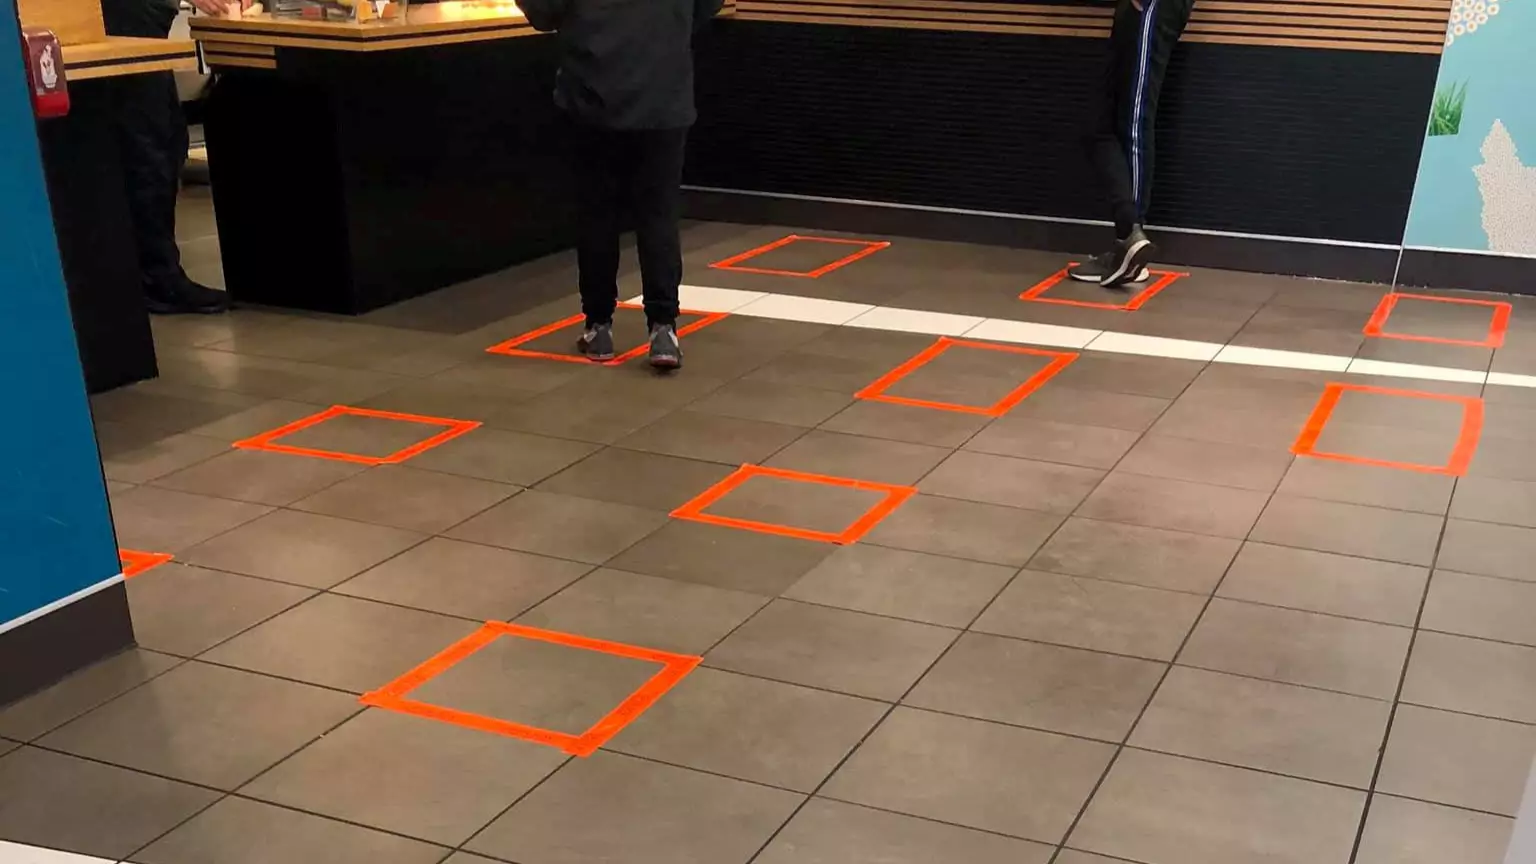 McDonald's Store Marks Out Where Customers Should Stand To Socially Distance Themselves From Others